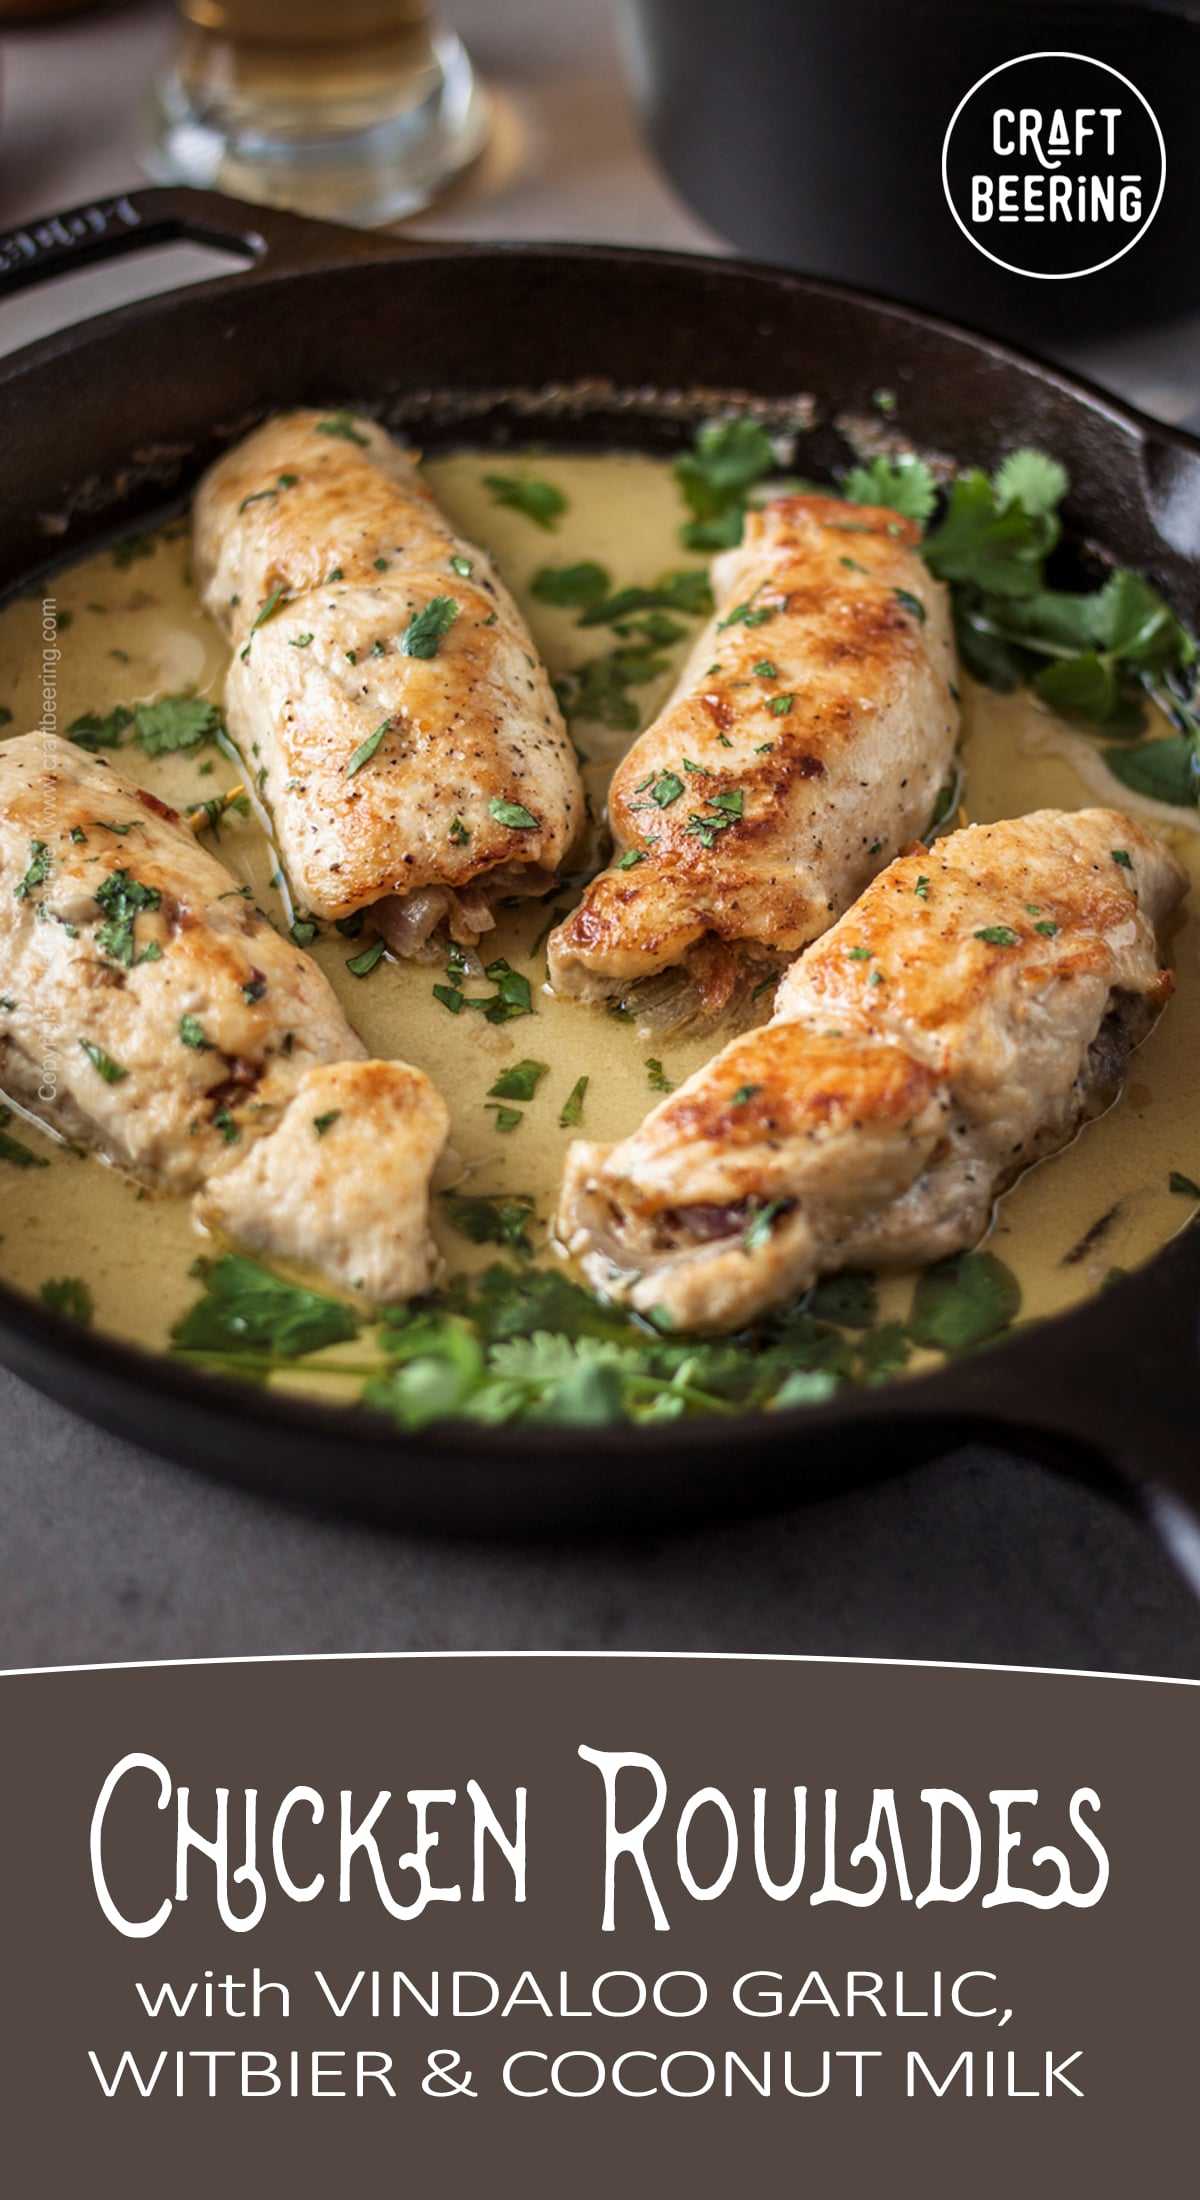 Beer chicken roulades. Vindaloo garlic stuffed chicken roulades simmered in a delicious Belgian Witbier and coconut milk sauce. #chickenroulades #beerchicken #beerchickenroulades #vindaloo #cookingwithbeer #craftbeering